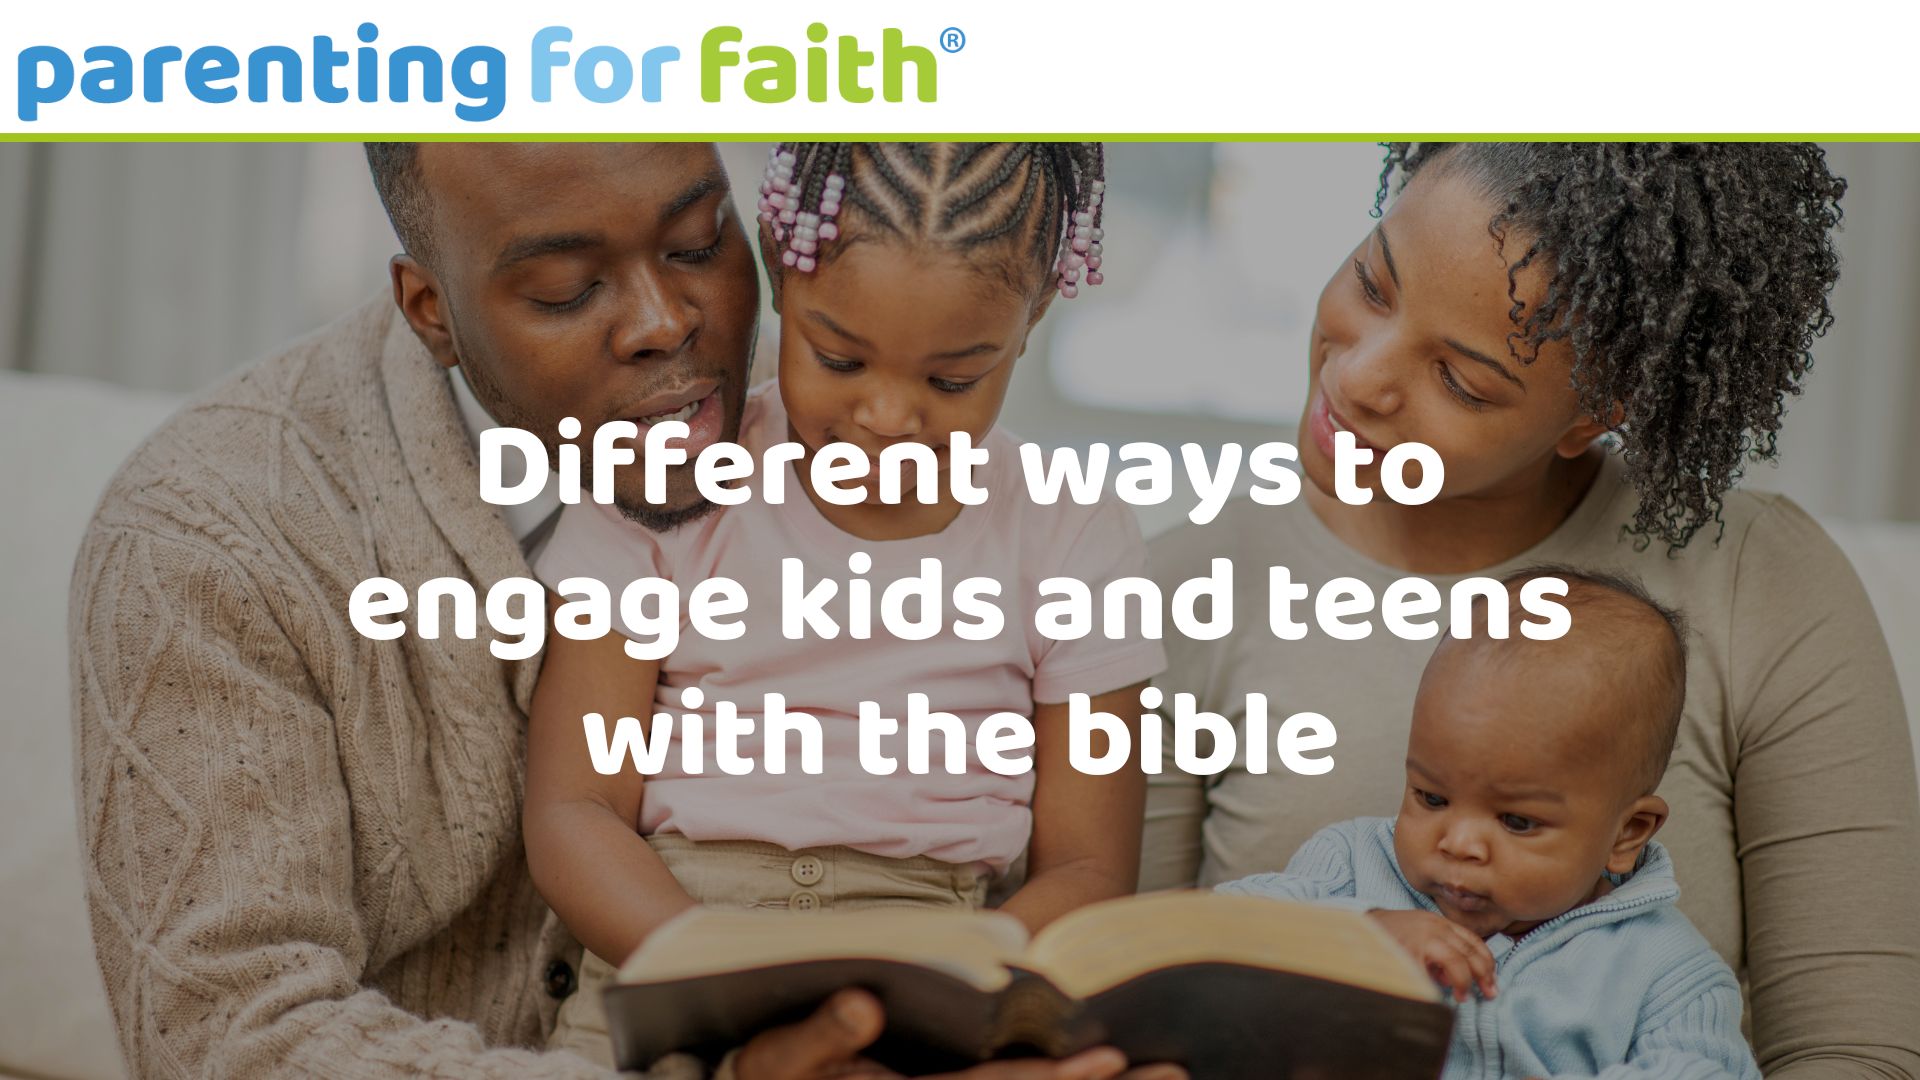 Different ways to engage kids and teens with the bible image credit ()